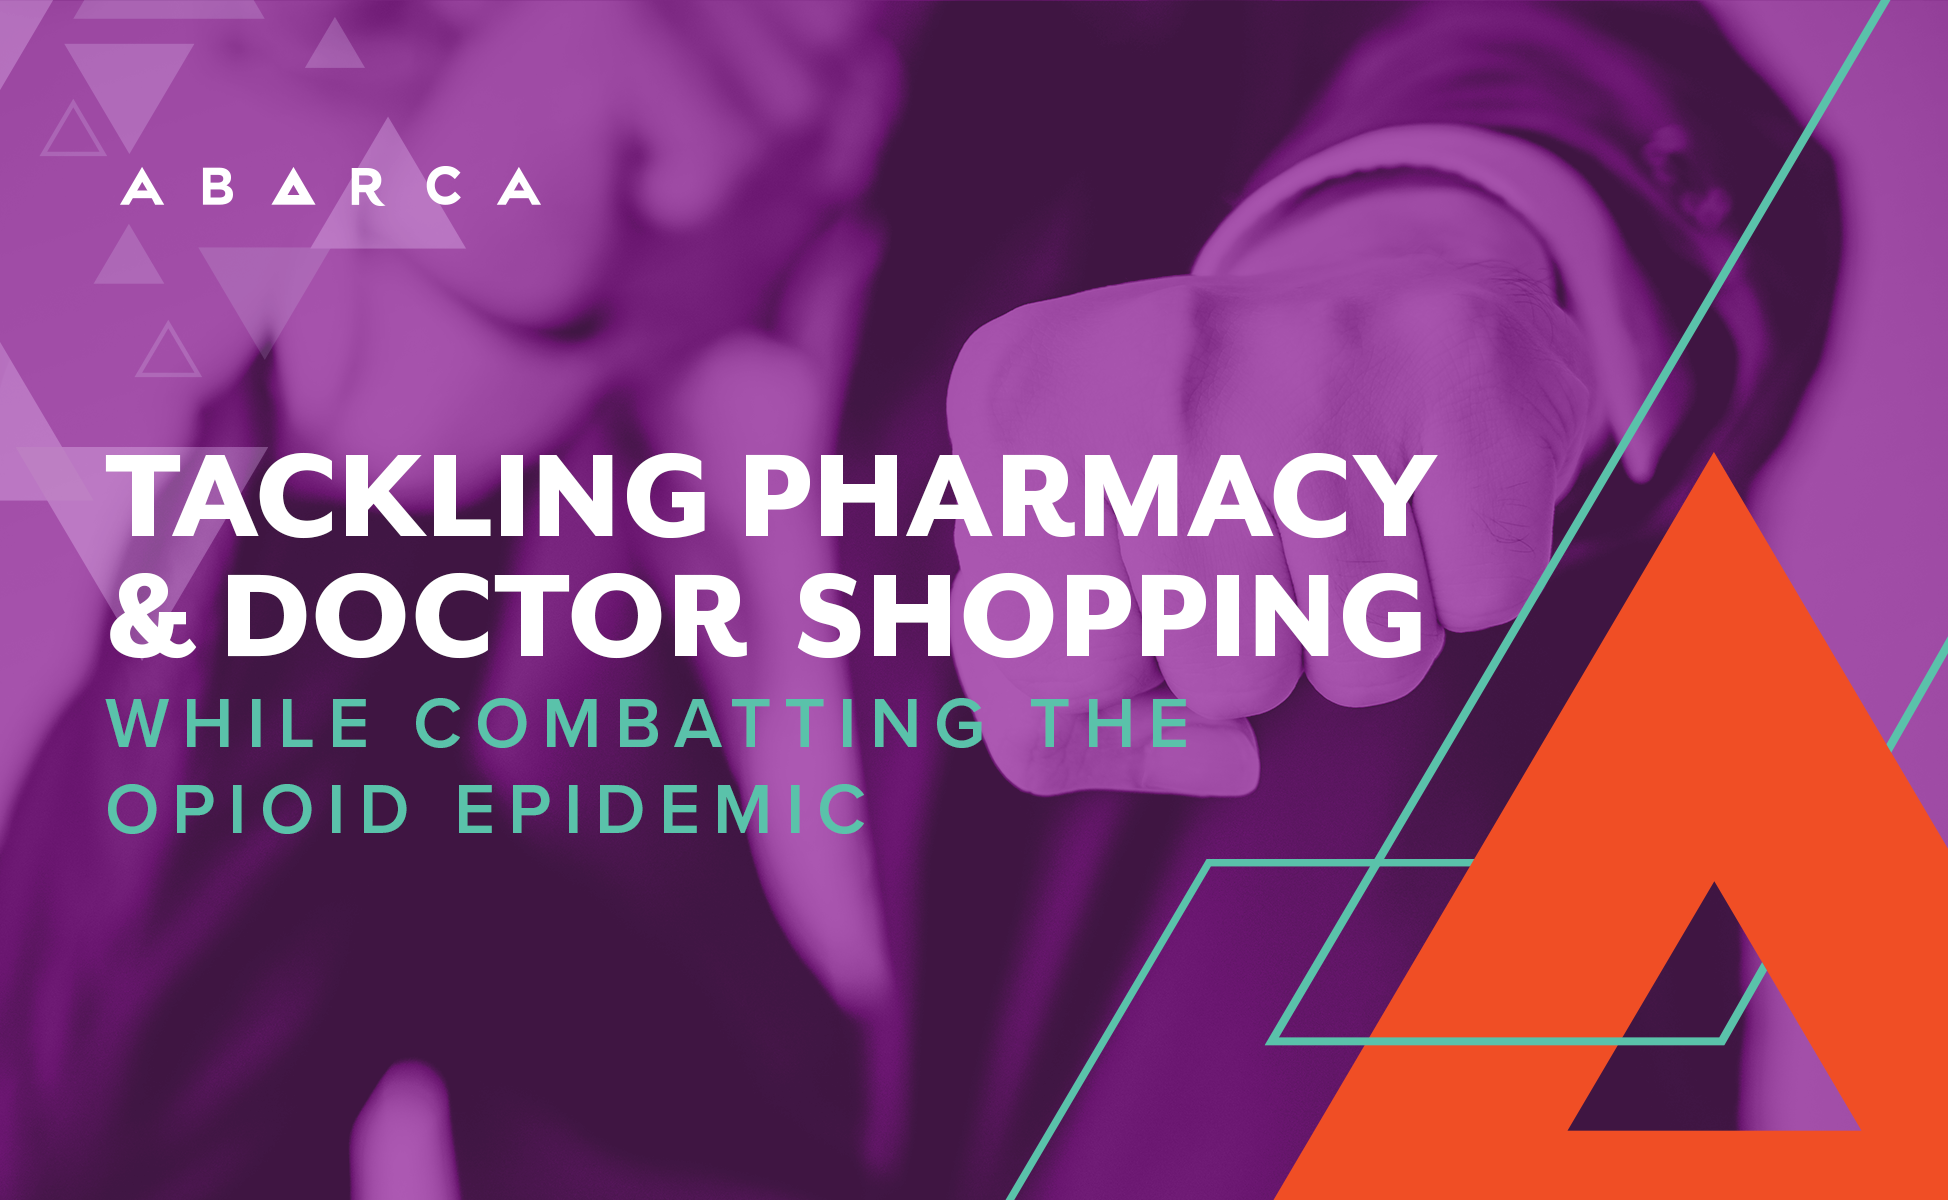 Abarca Tackles Pharmacy & Doctor Shopping While Combatting the Opioid Epidemic